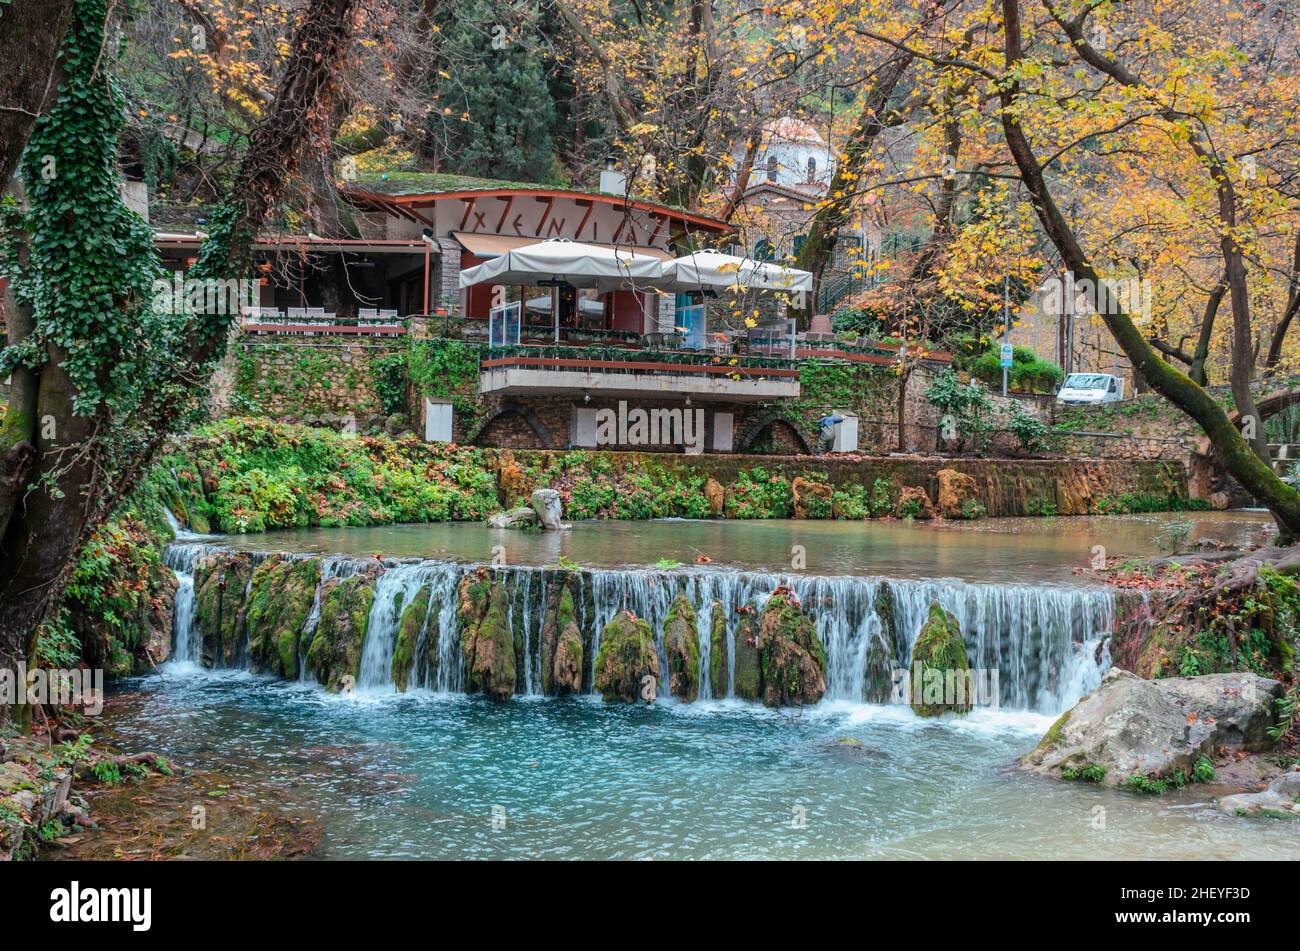 Livadia Greece, Livadia is the beautiful city of central Greece and the the capital of the Boeotia regional district. Stock Photo